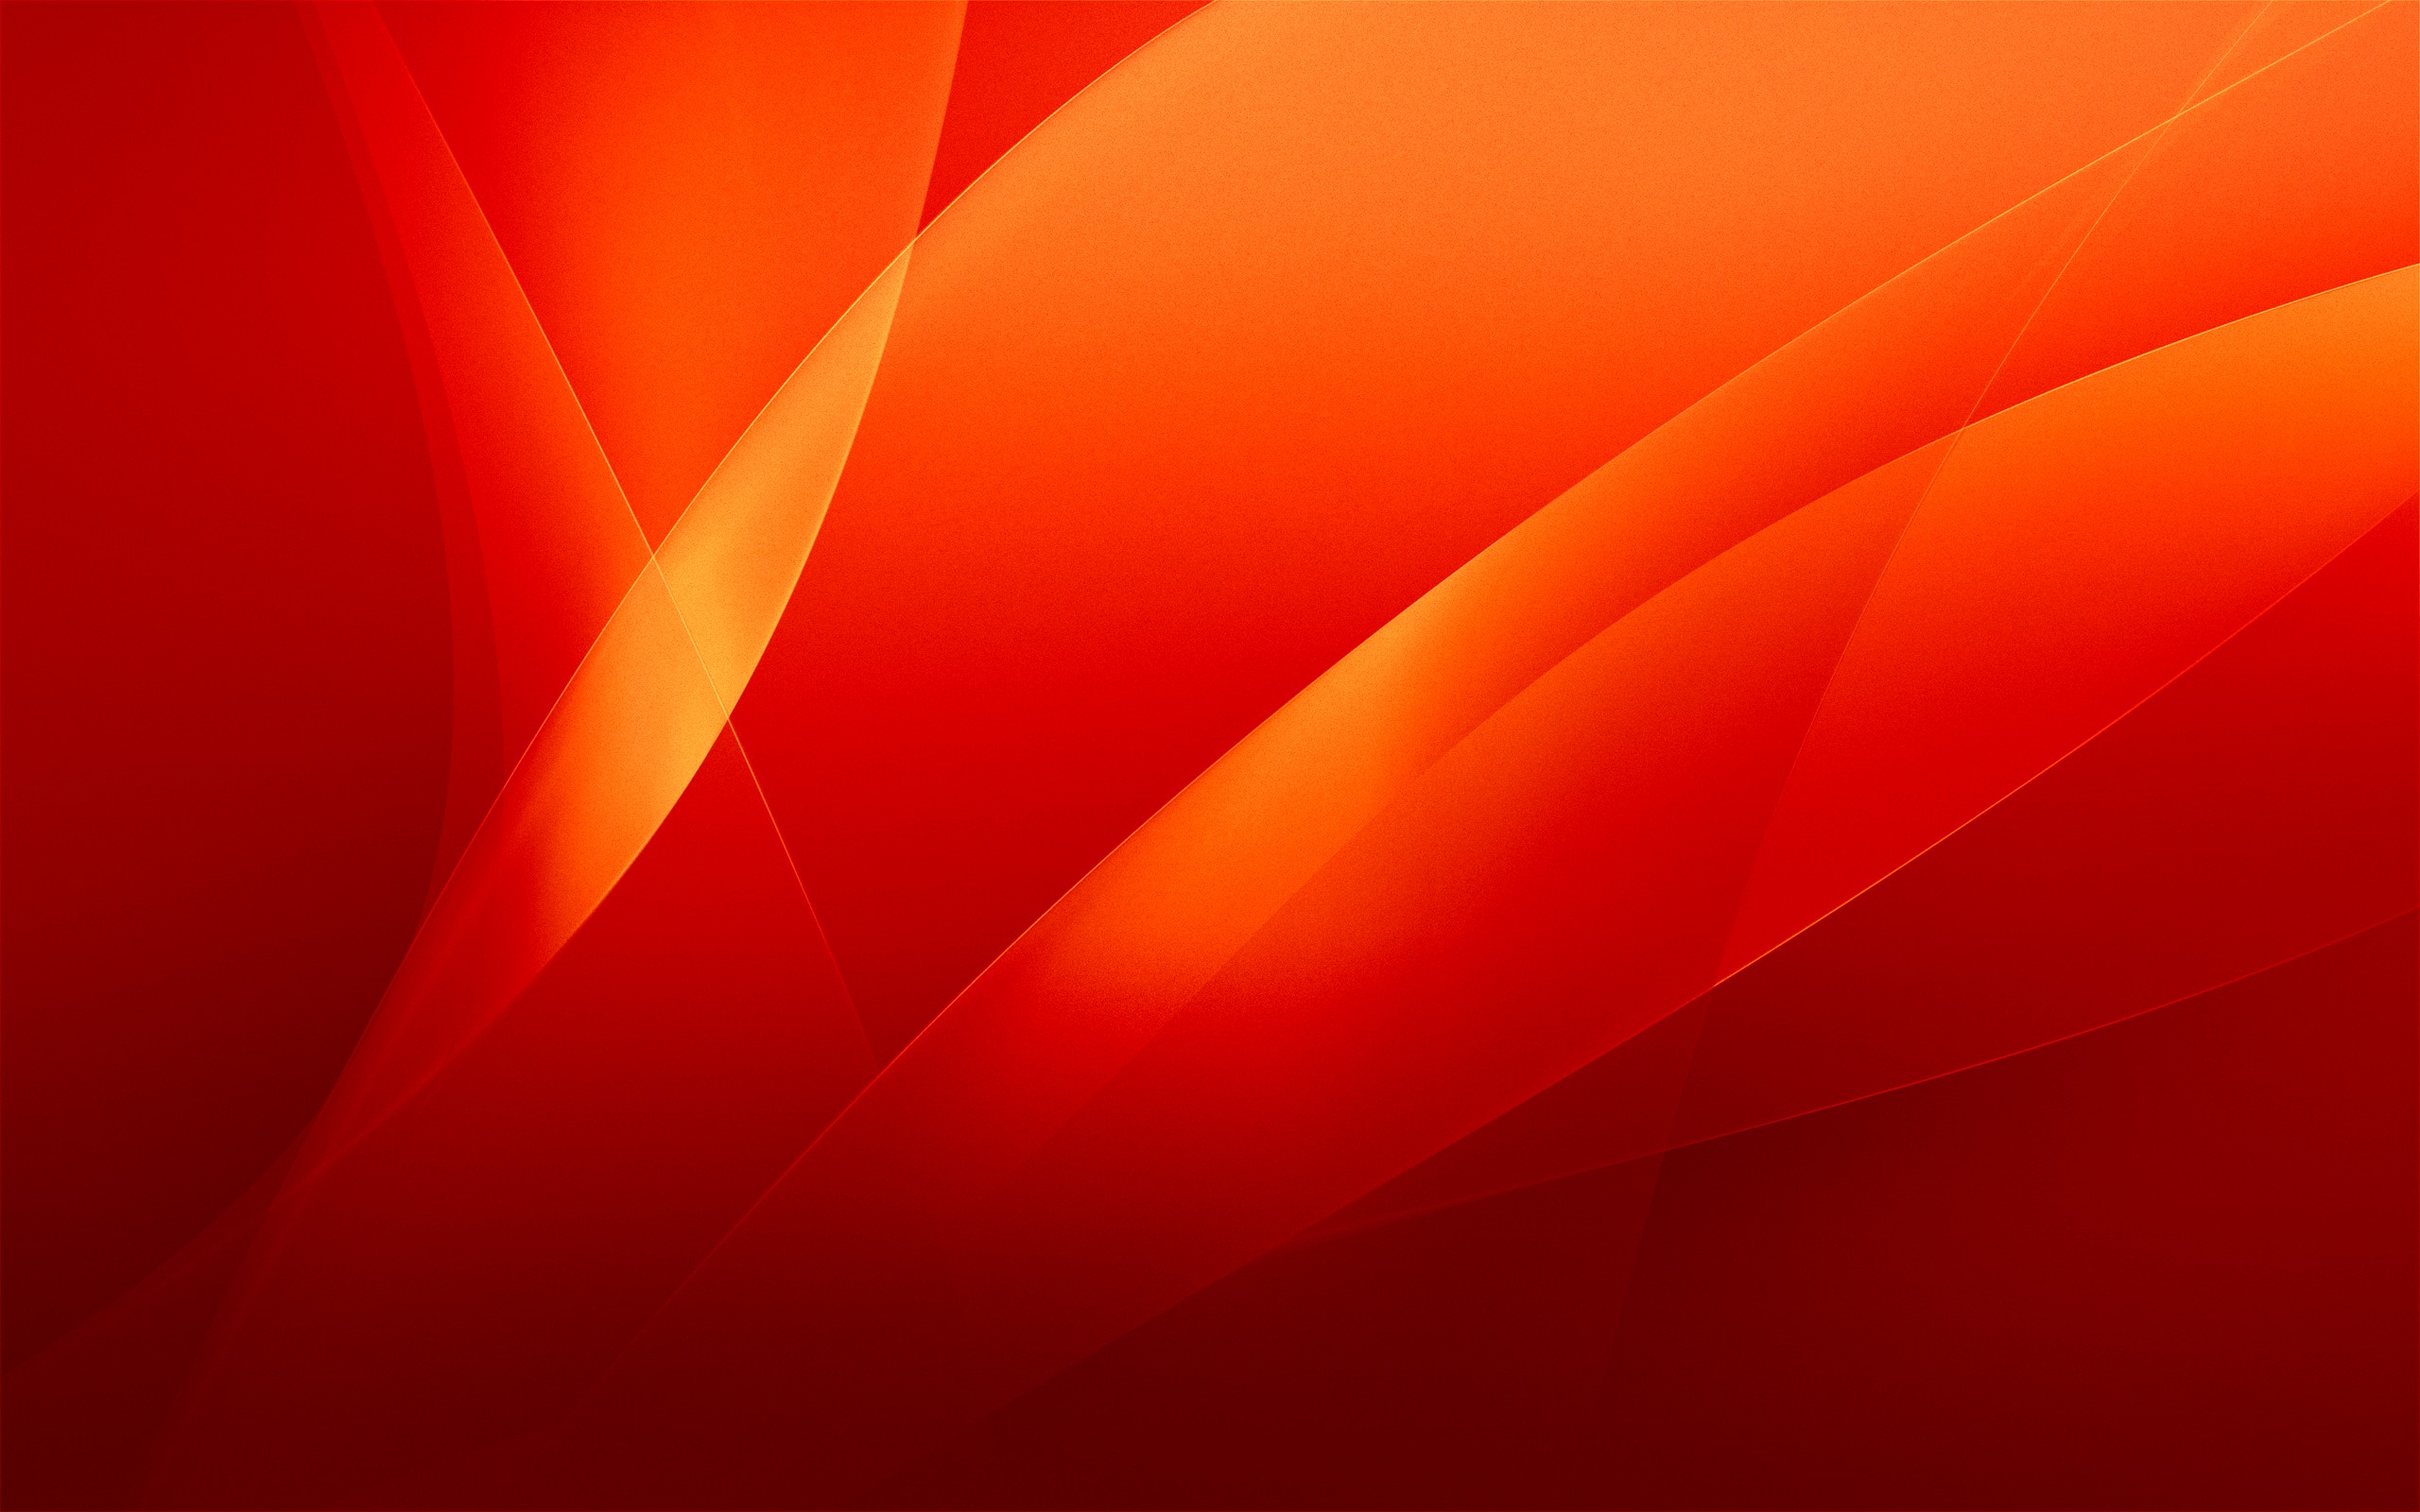 red wallpaper hd download,red,orange,yellow,peach,close up